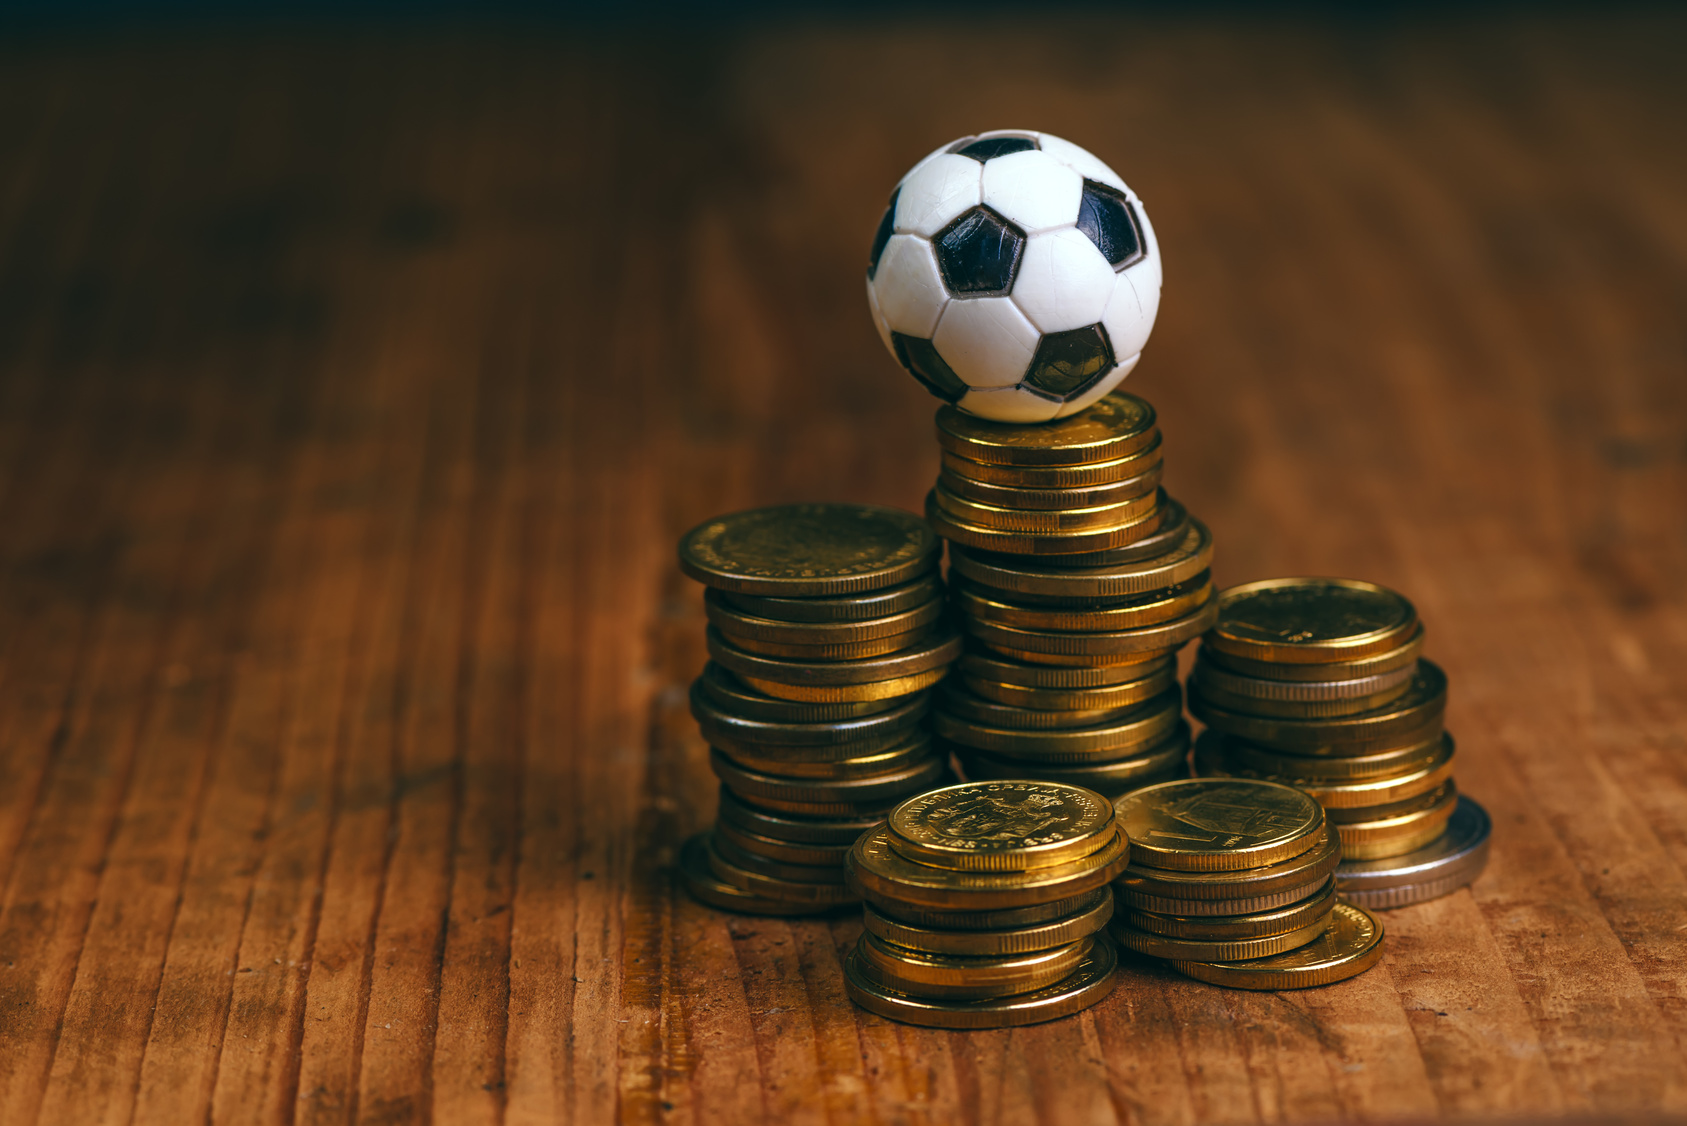 Soccer bet concept with small football on top of coin stack, making money by predicting sport results. betting